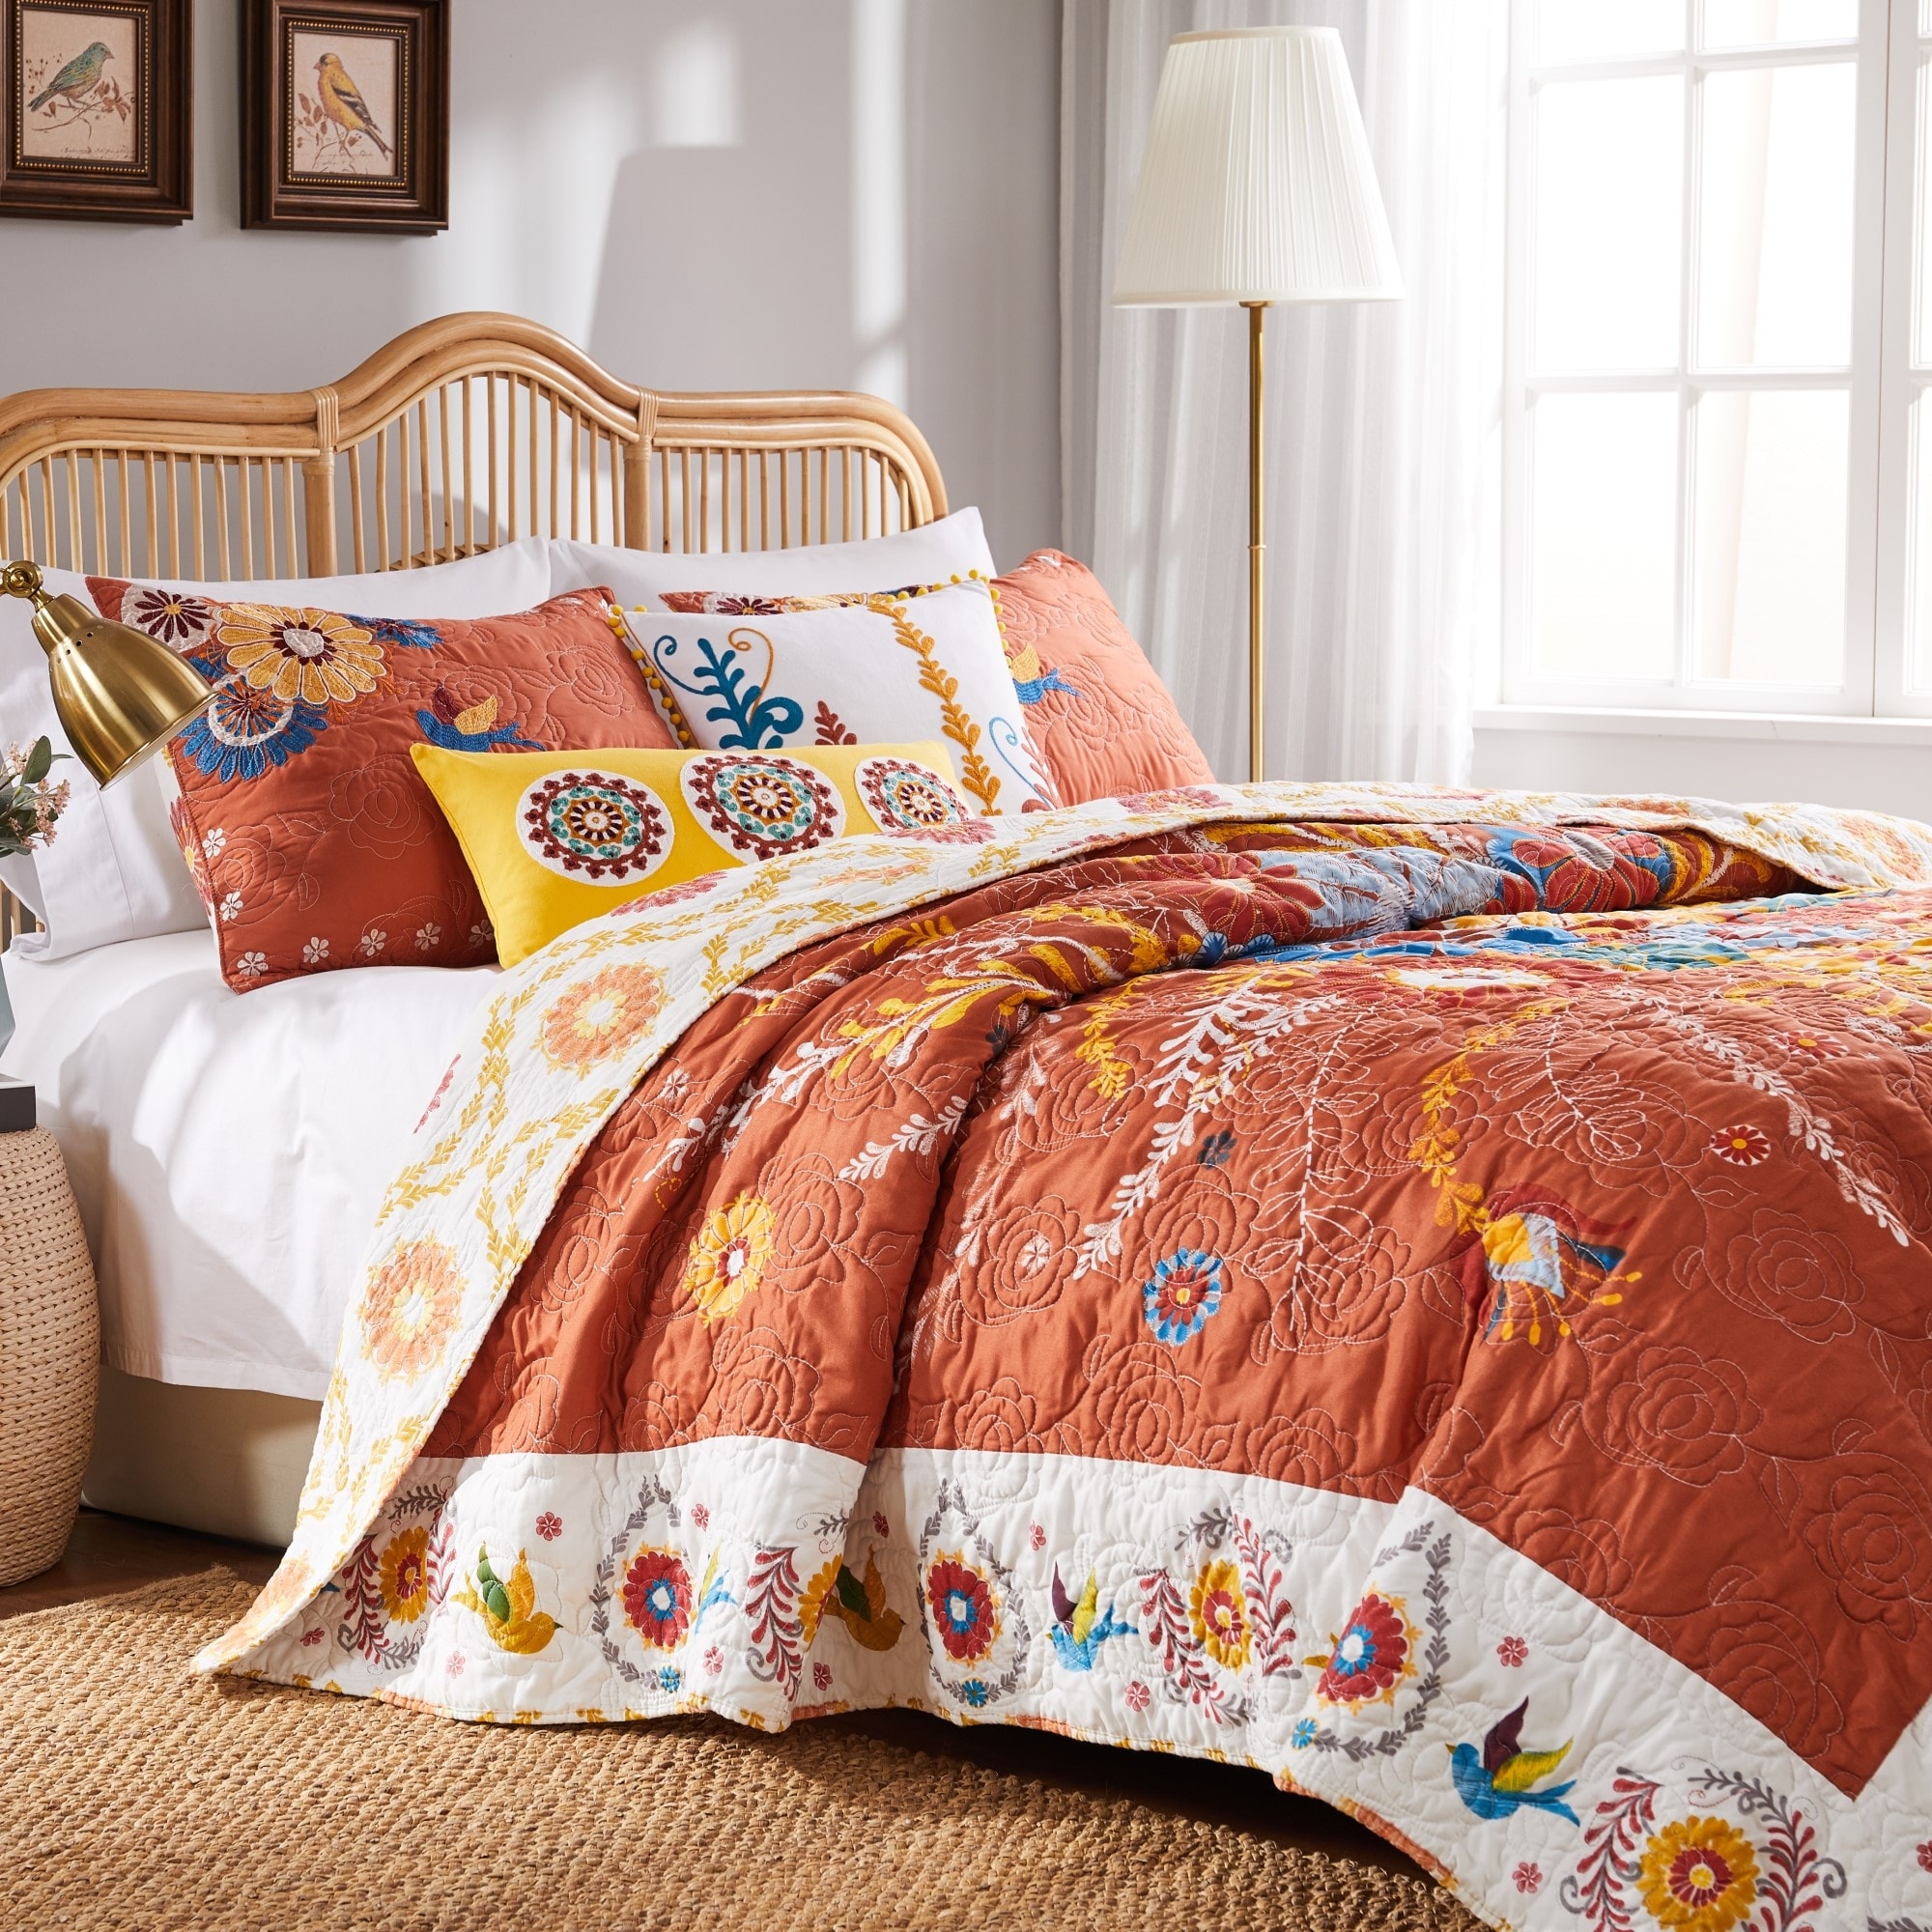 Blue Floral Quilts and Bedspreads - Bed Bath & Beyond